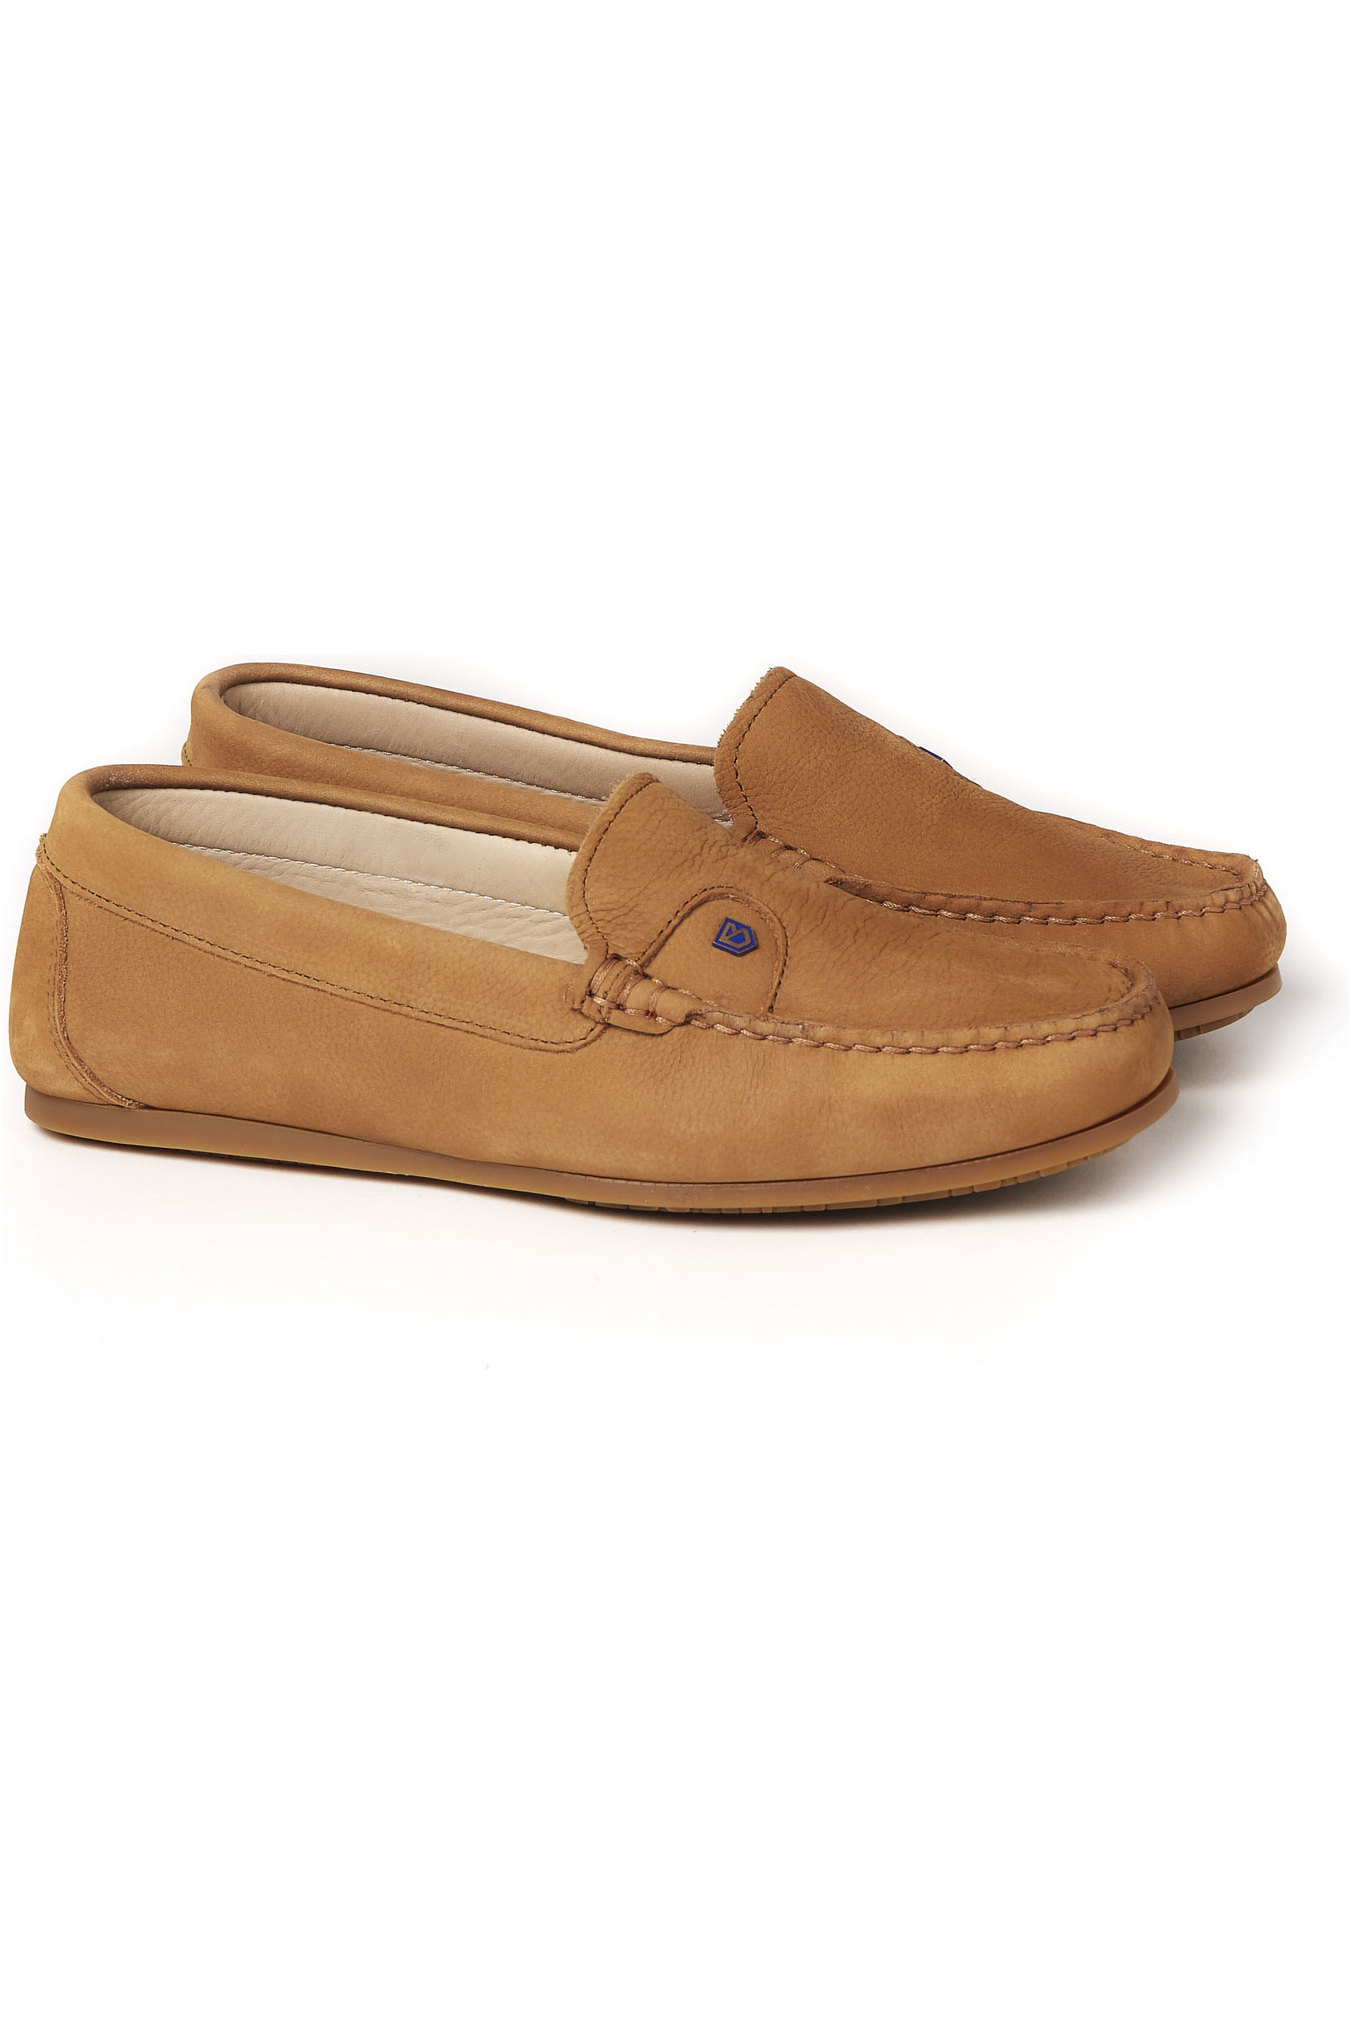 dubarry boat shoes womens